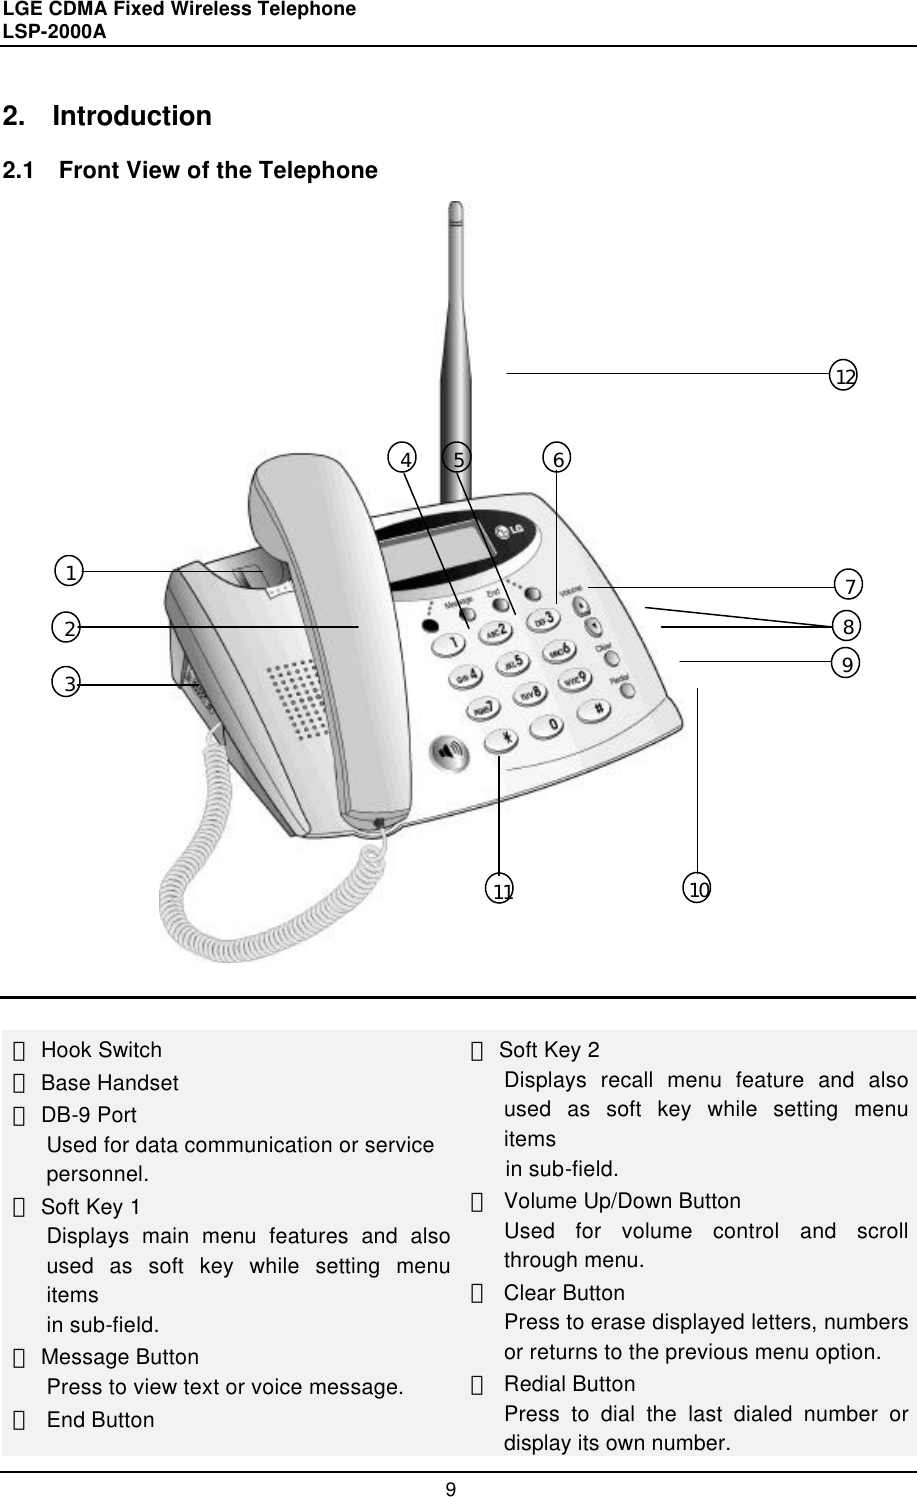 LGE CDMA Fixed Wireless Telephone                                       LSP-2000A     9  2. Introduction  2.1  Front View of the Telephone                              Hook Switch  Base Handset  DB-9 Port Used for data communication or service personnel.  Soft Key 1 Displays main menu features and also used as soft key while setting menu items in sub-field.  Message Button Press to view text or voice message.  End Button  Soft Key 2 Displays recall menu feature and also used as soft key while setting menu items     in sub-field.  Volume Up/Down Button Used for volume control and scroll through menu.  Clear Button Press to erase displayed letters, numbers or returns to the previous menu option.  Redial Button Press to dial the last dialed number or display its own number. 1 3 2 4 5 6 7 8 9 10 11 12 